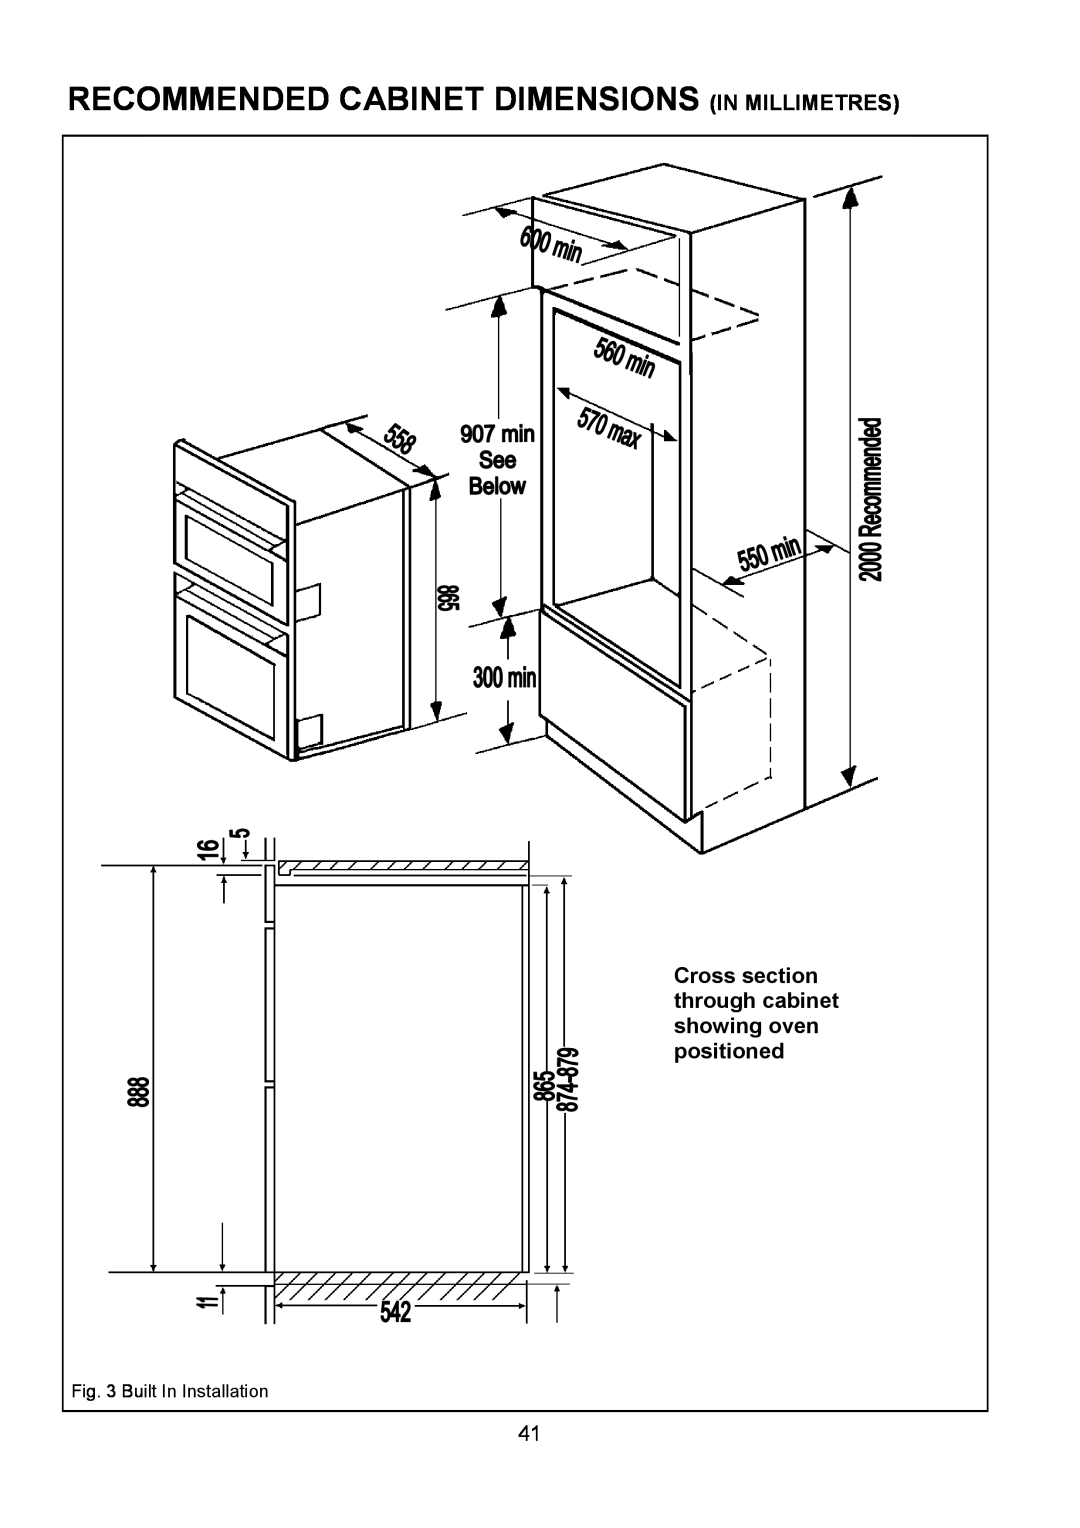 Electrolux D4101-4 operating instructions Recommended Cabinet Dimensions In Millimetres, Built In Installation 